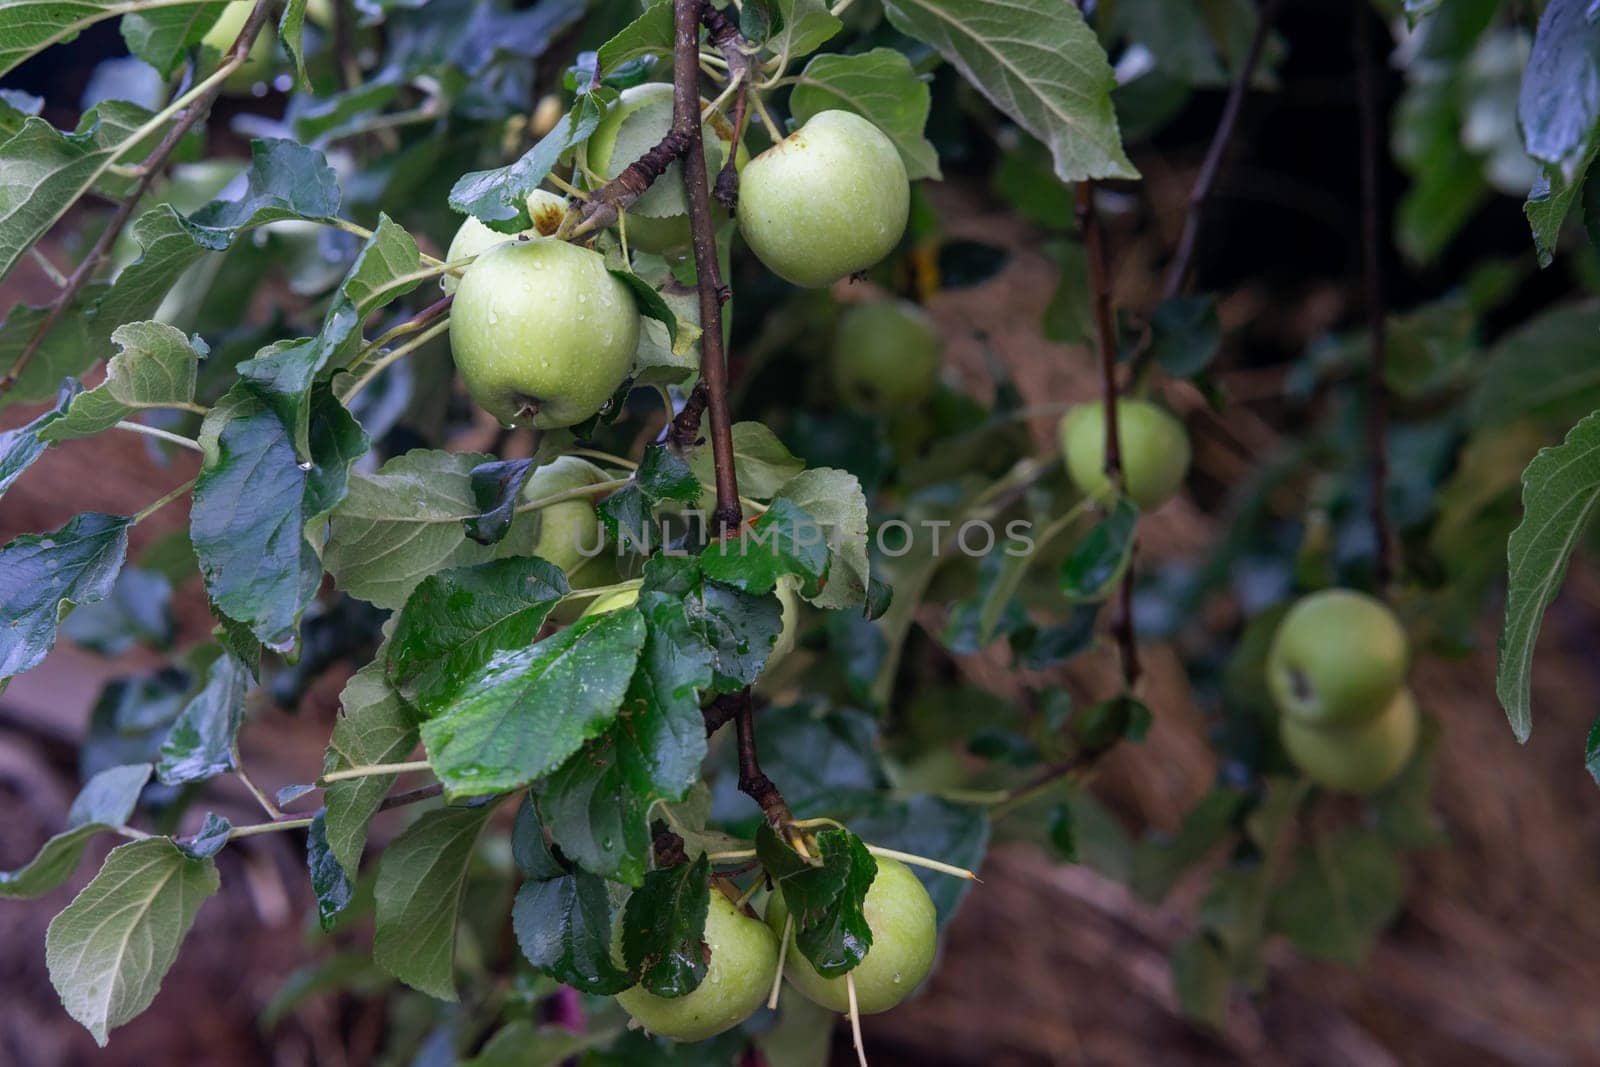 Several green apples on a branch of an apple tree. Raindrops on green apples.